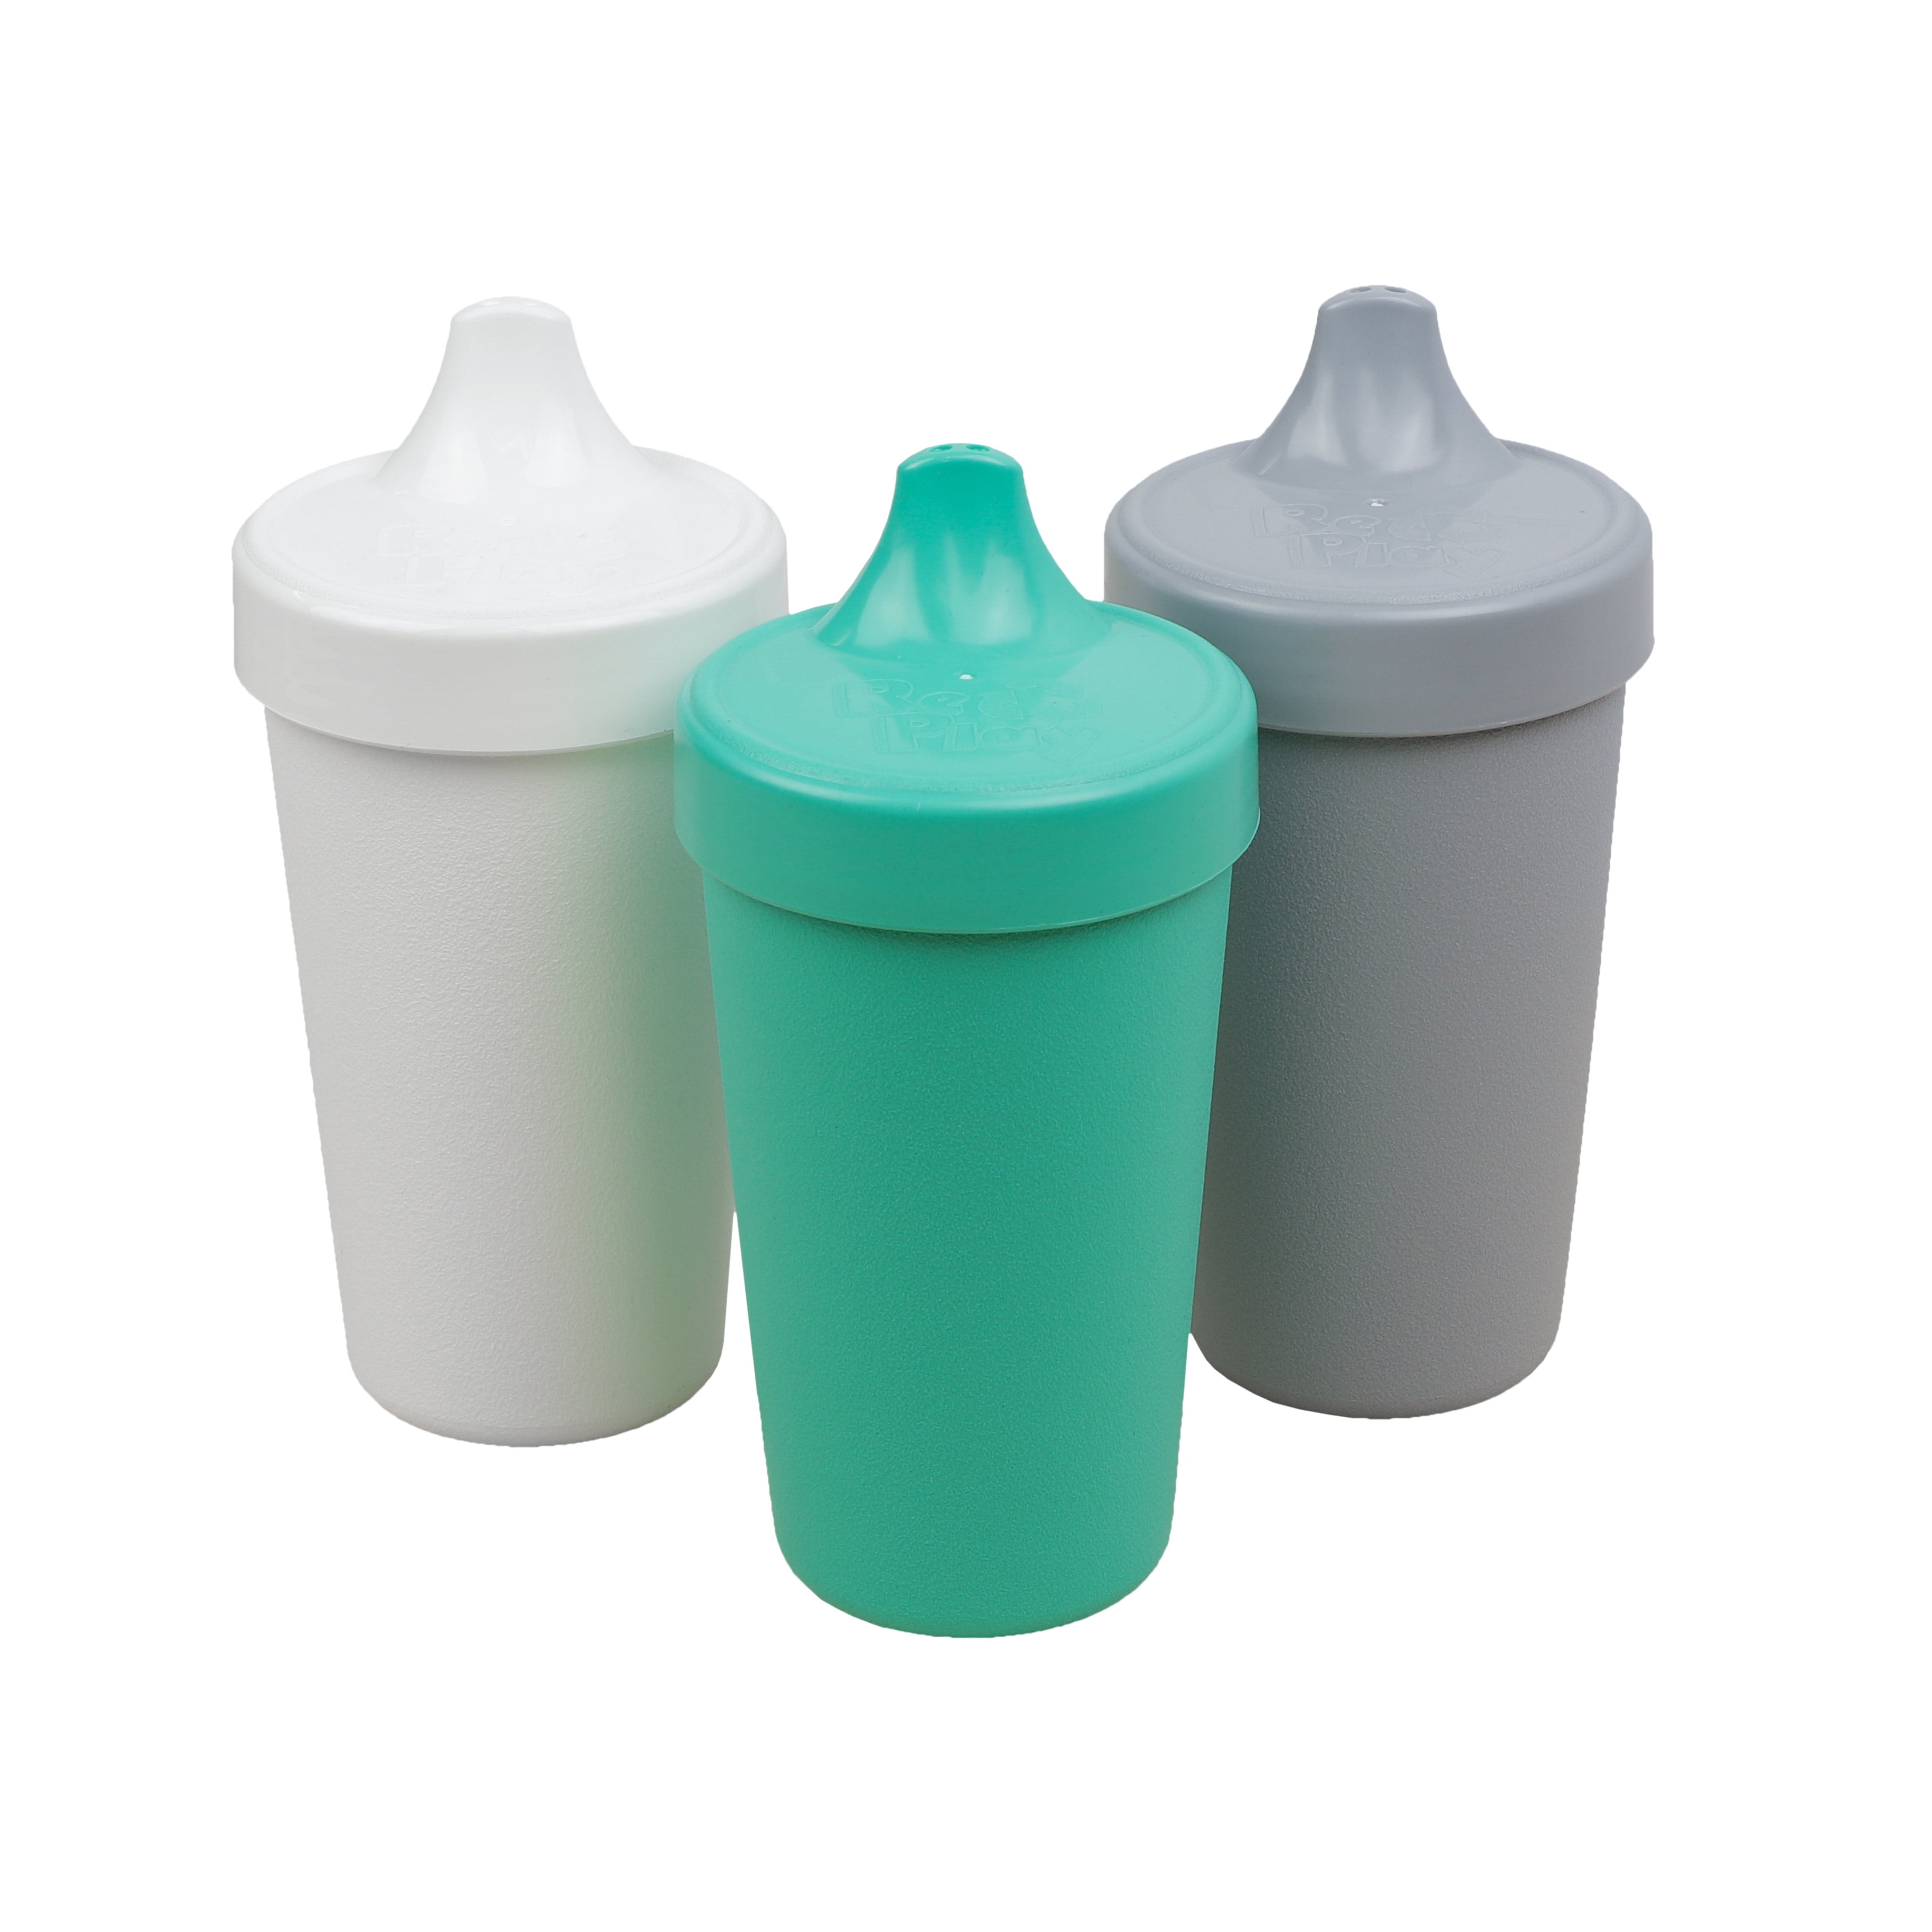 Re-Play Made in USA 3pk Toddler Feeding No Spill Sippy Cups for Baby,  Toddler, and Child Feeding - Aqua, Grey, White (Modern Mint) Durable,  Dependable and Tough Toddler Sippy Cups! 